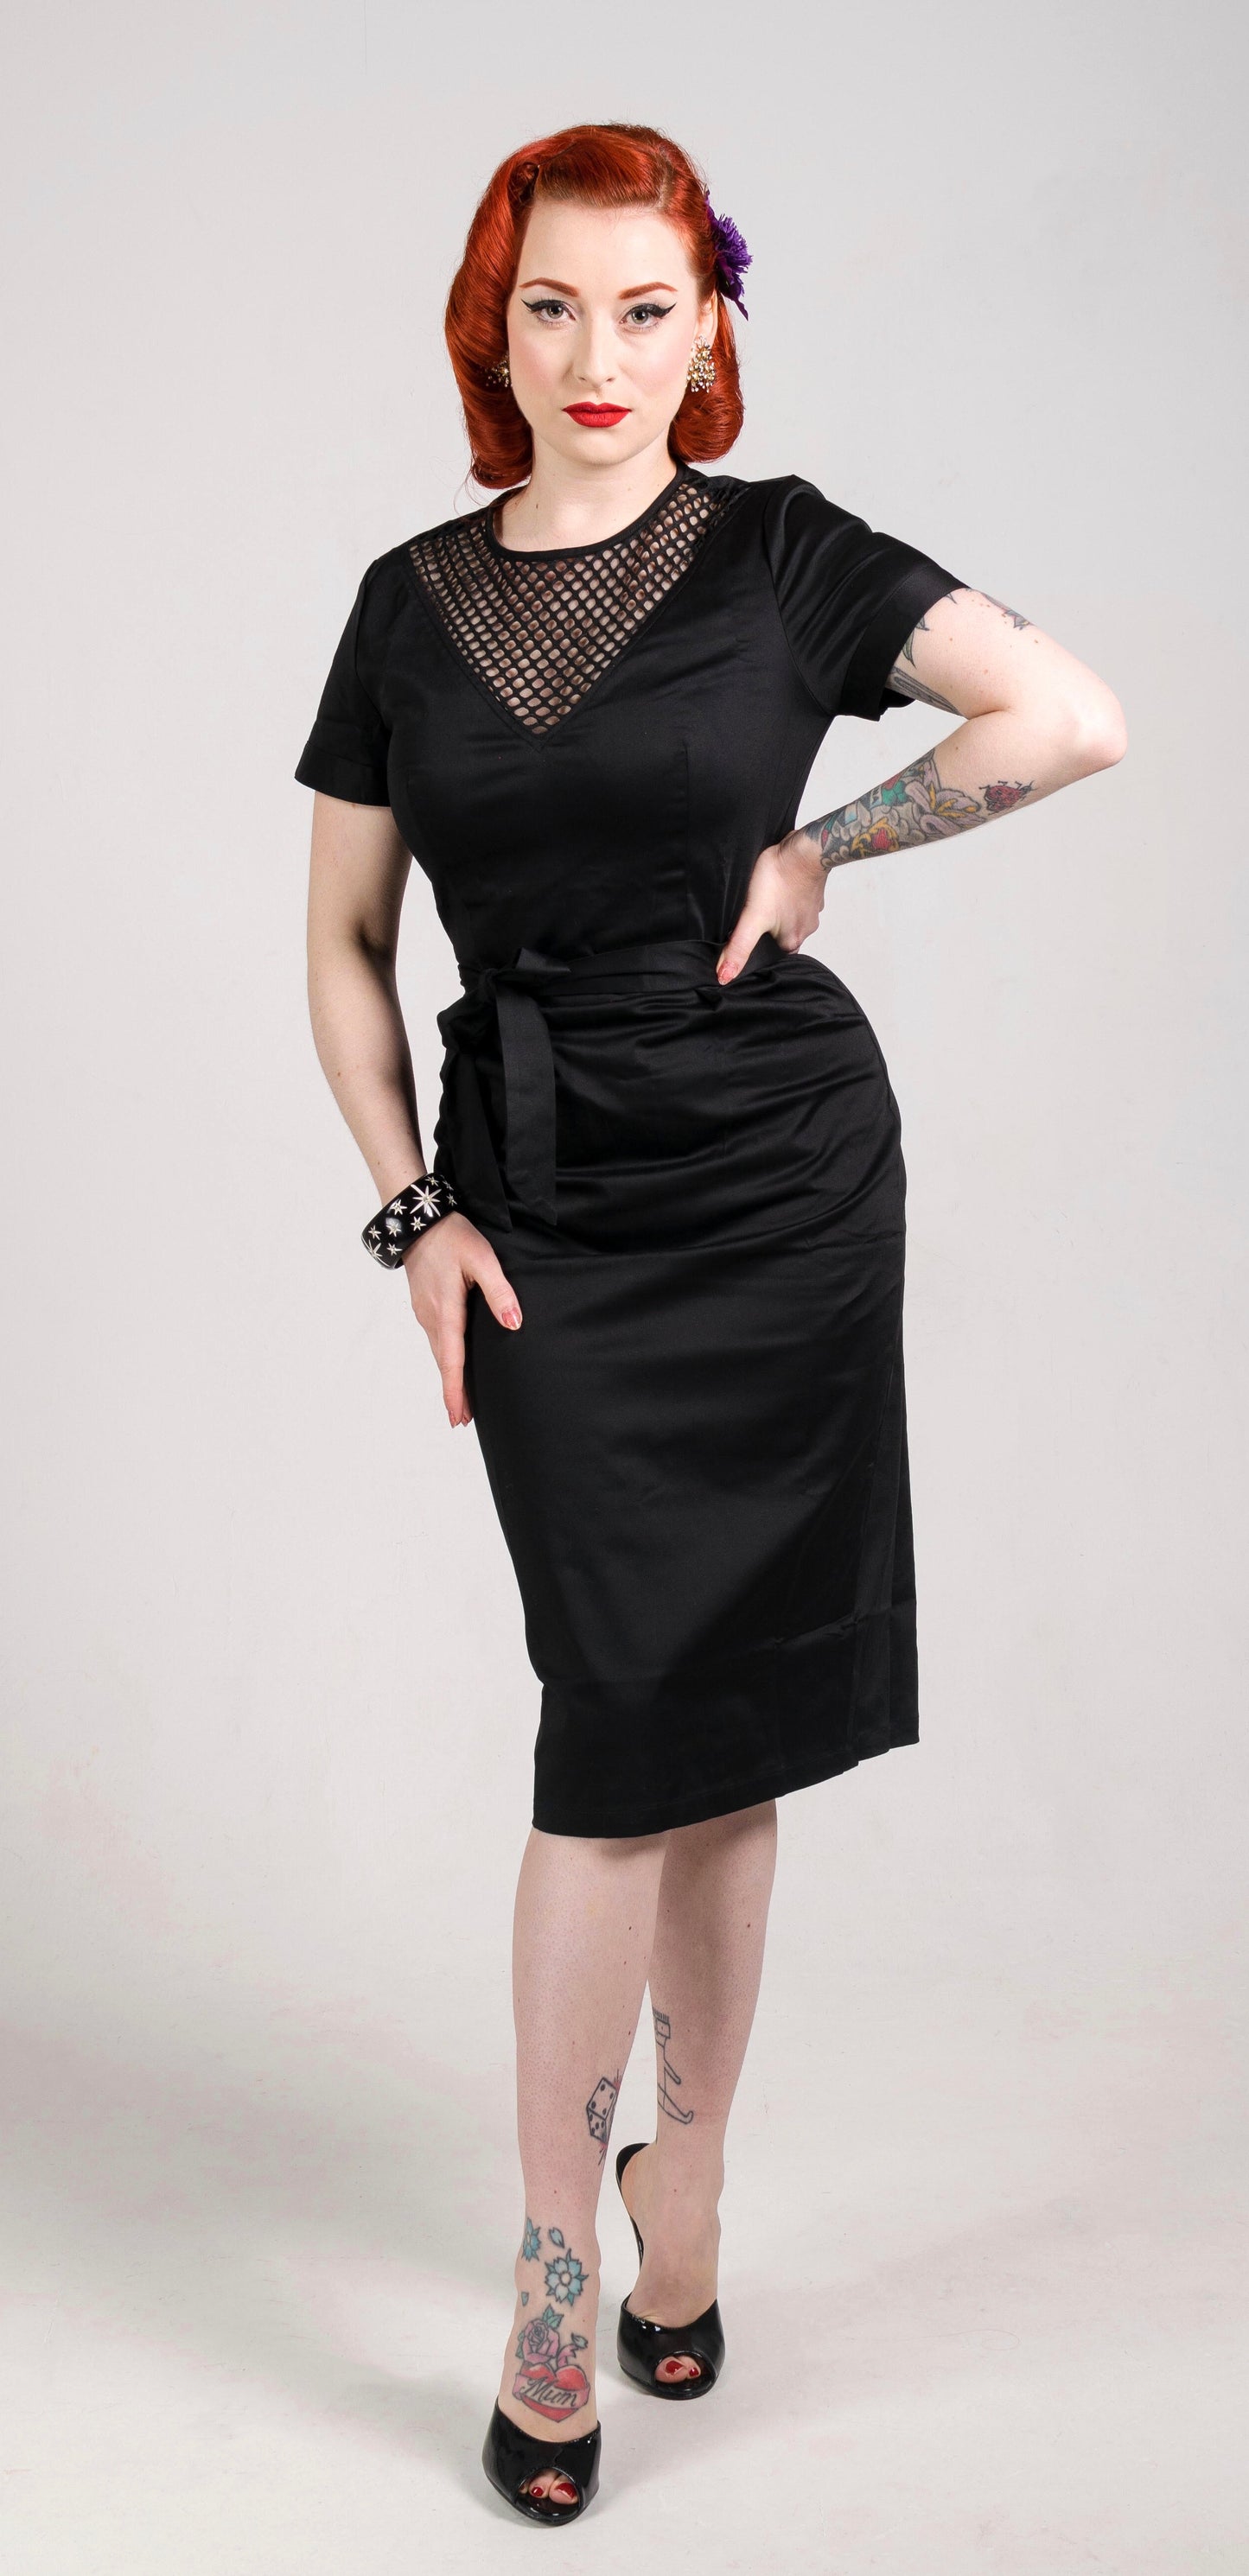 Vintage 1950s style black wiggle dress with fishnet panel XS to 3XL